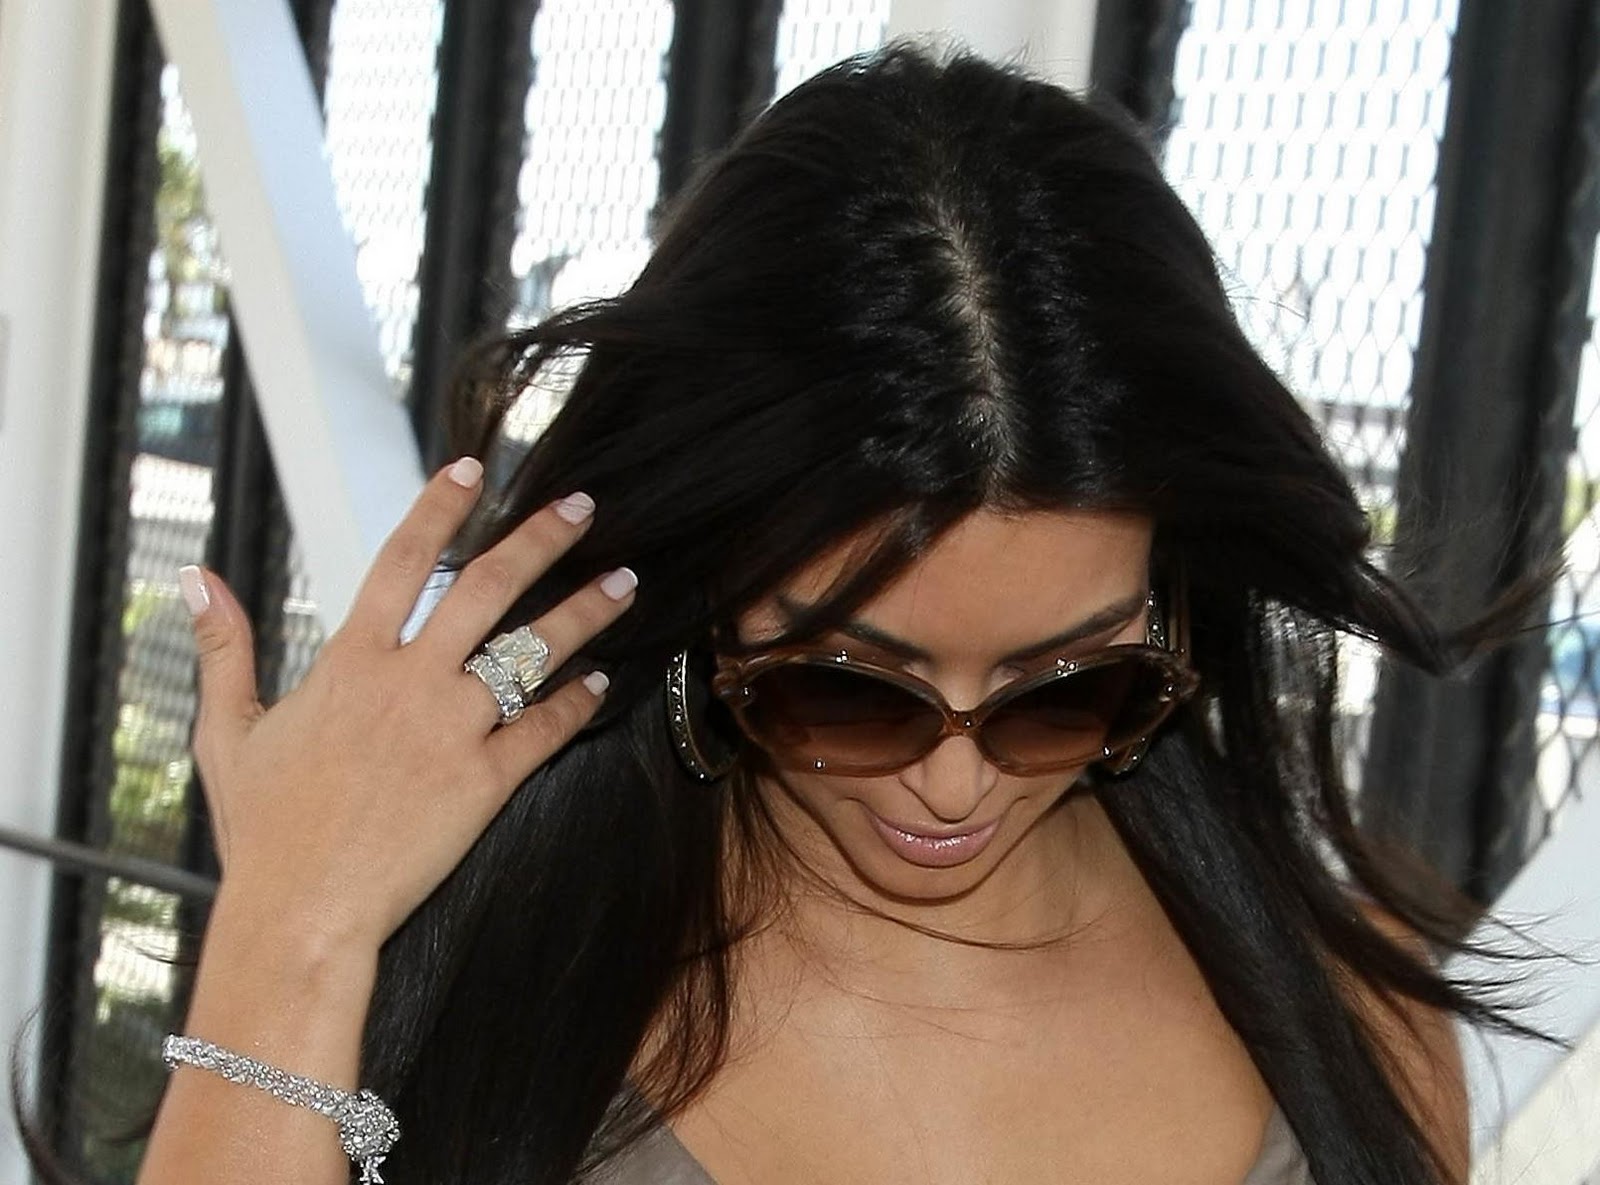 Kim flashes her wedding rings